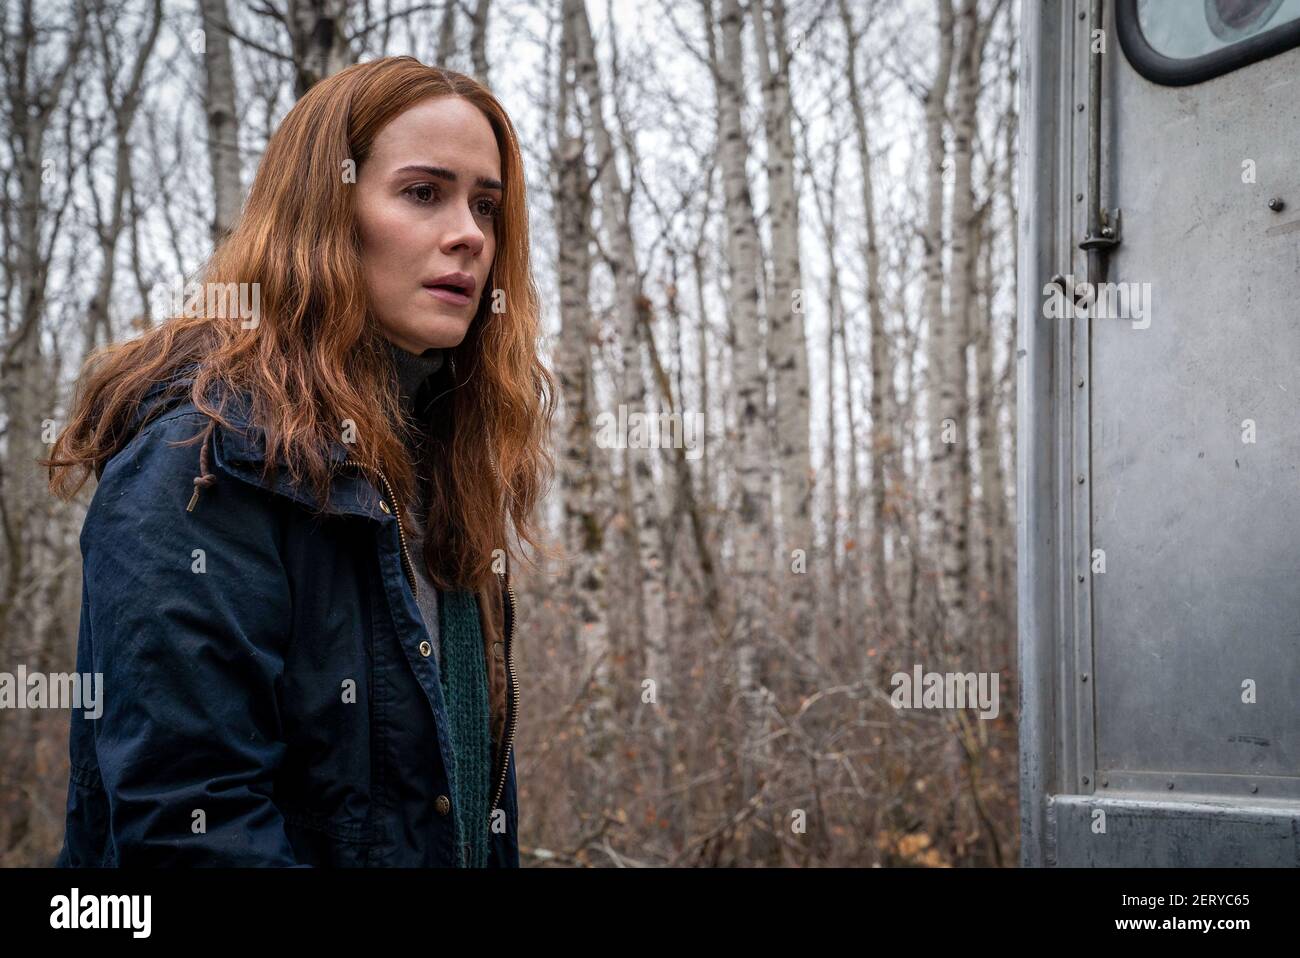 SARAH PAULSON in RUN (2020), directed by ANEESH CHAGANTY. Copyright: Editorial use only. No merchandising or book covers. This is a publicly distributed handout. Access rights only, no license of copyright provided. Only to be reproduced in conjunction with promotion of this film. Credit: LIONSGATE / Album Stock Photo